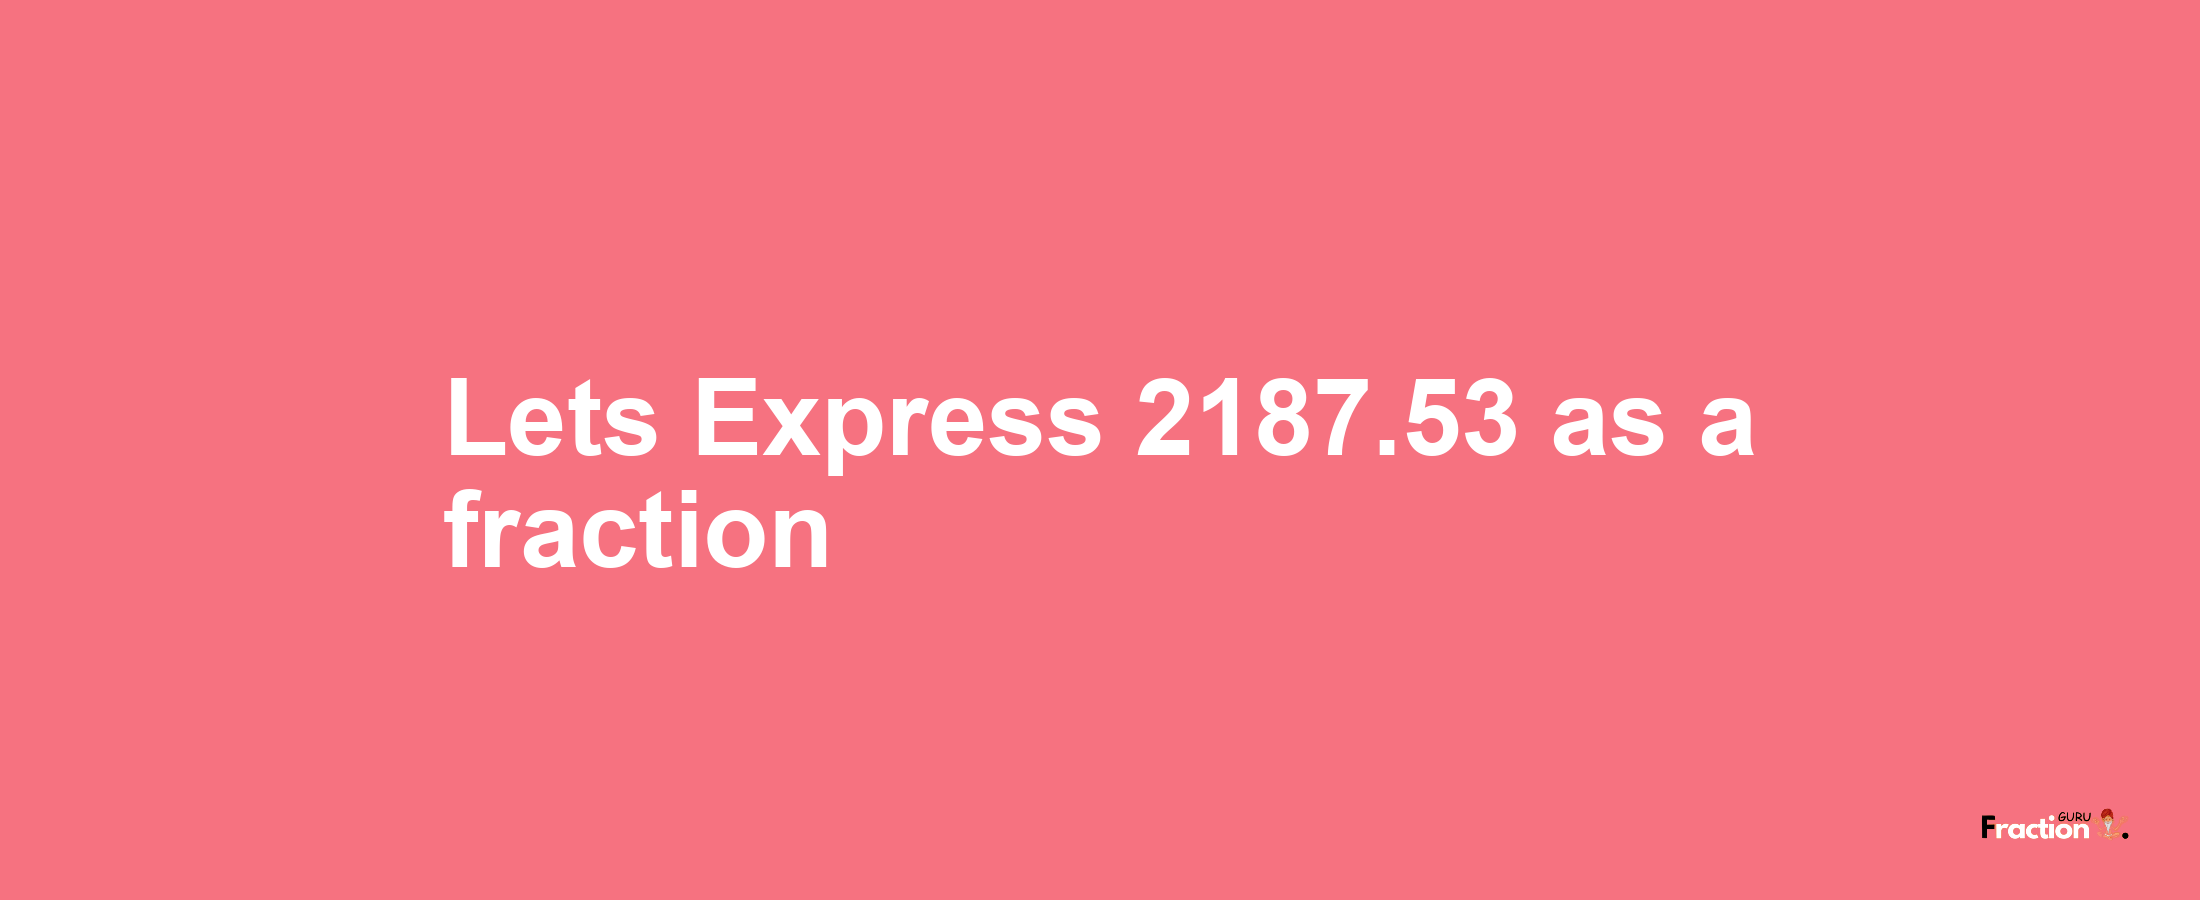 Lets Express 2187.53 as afraction